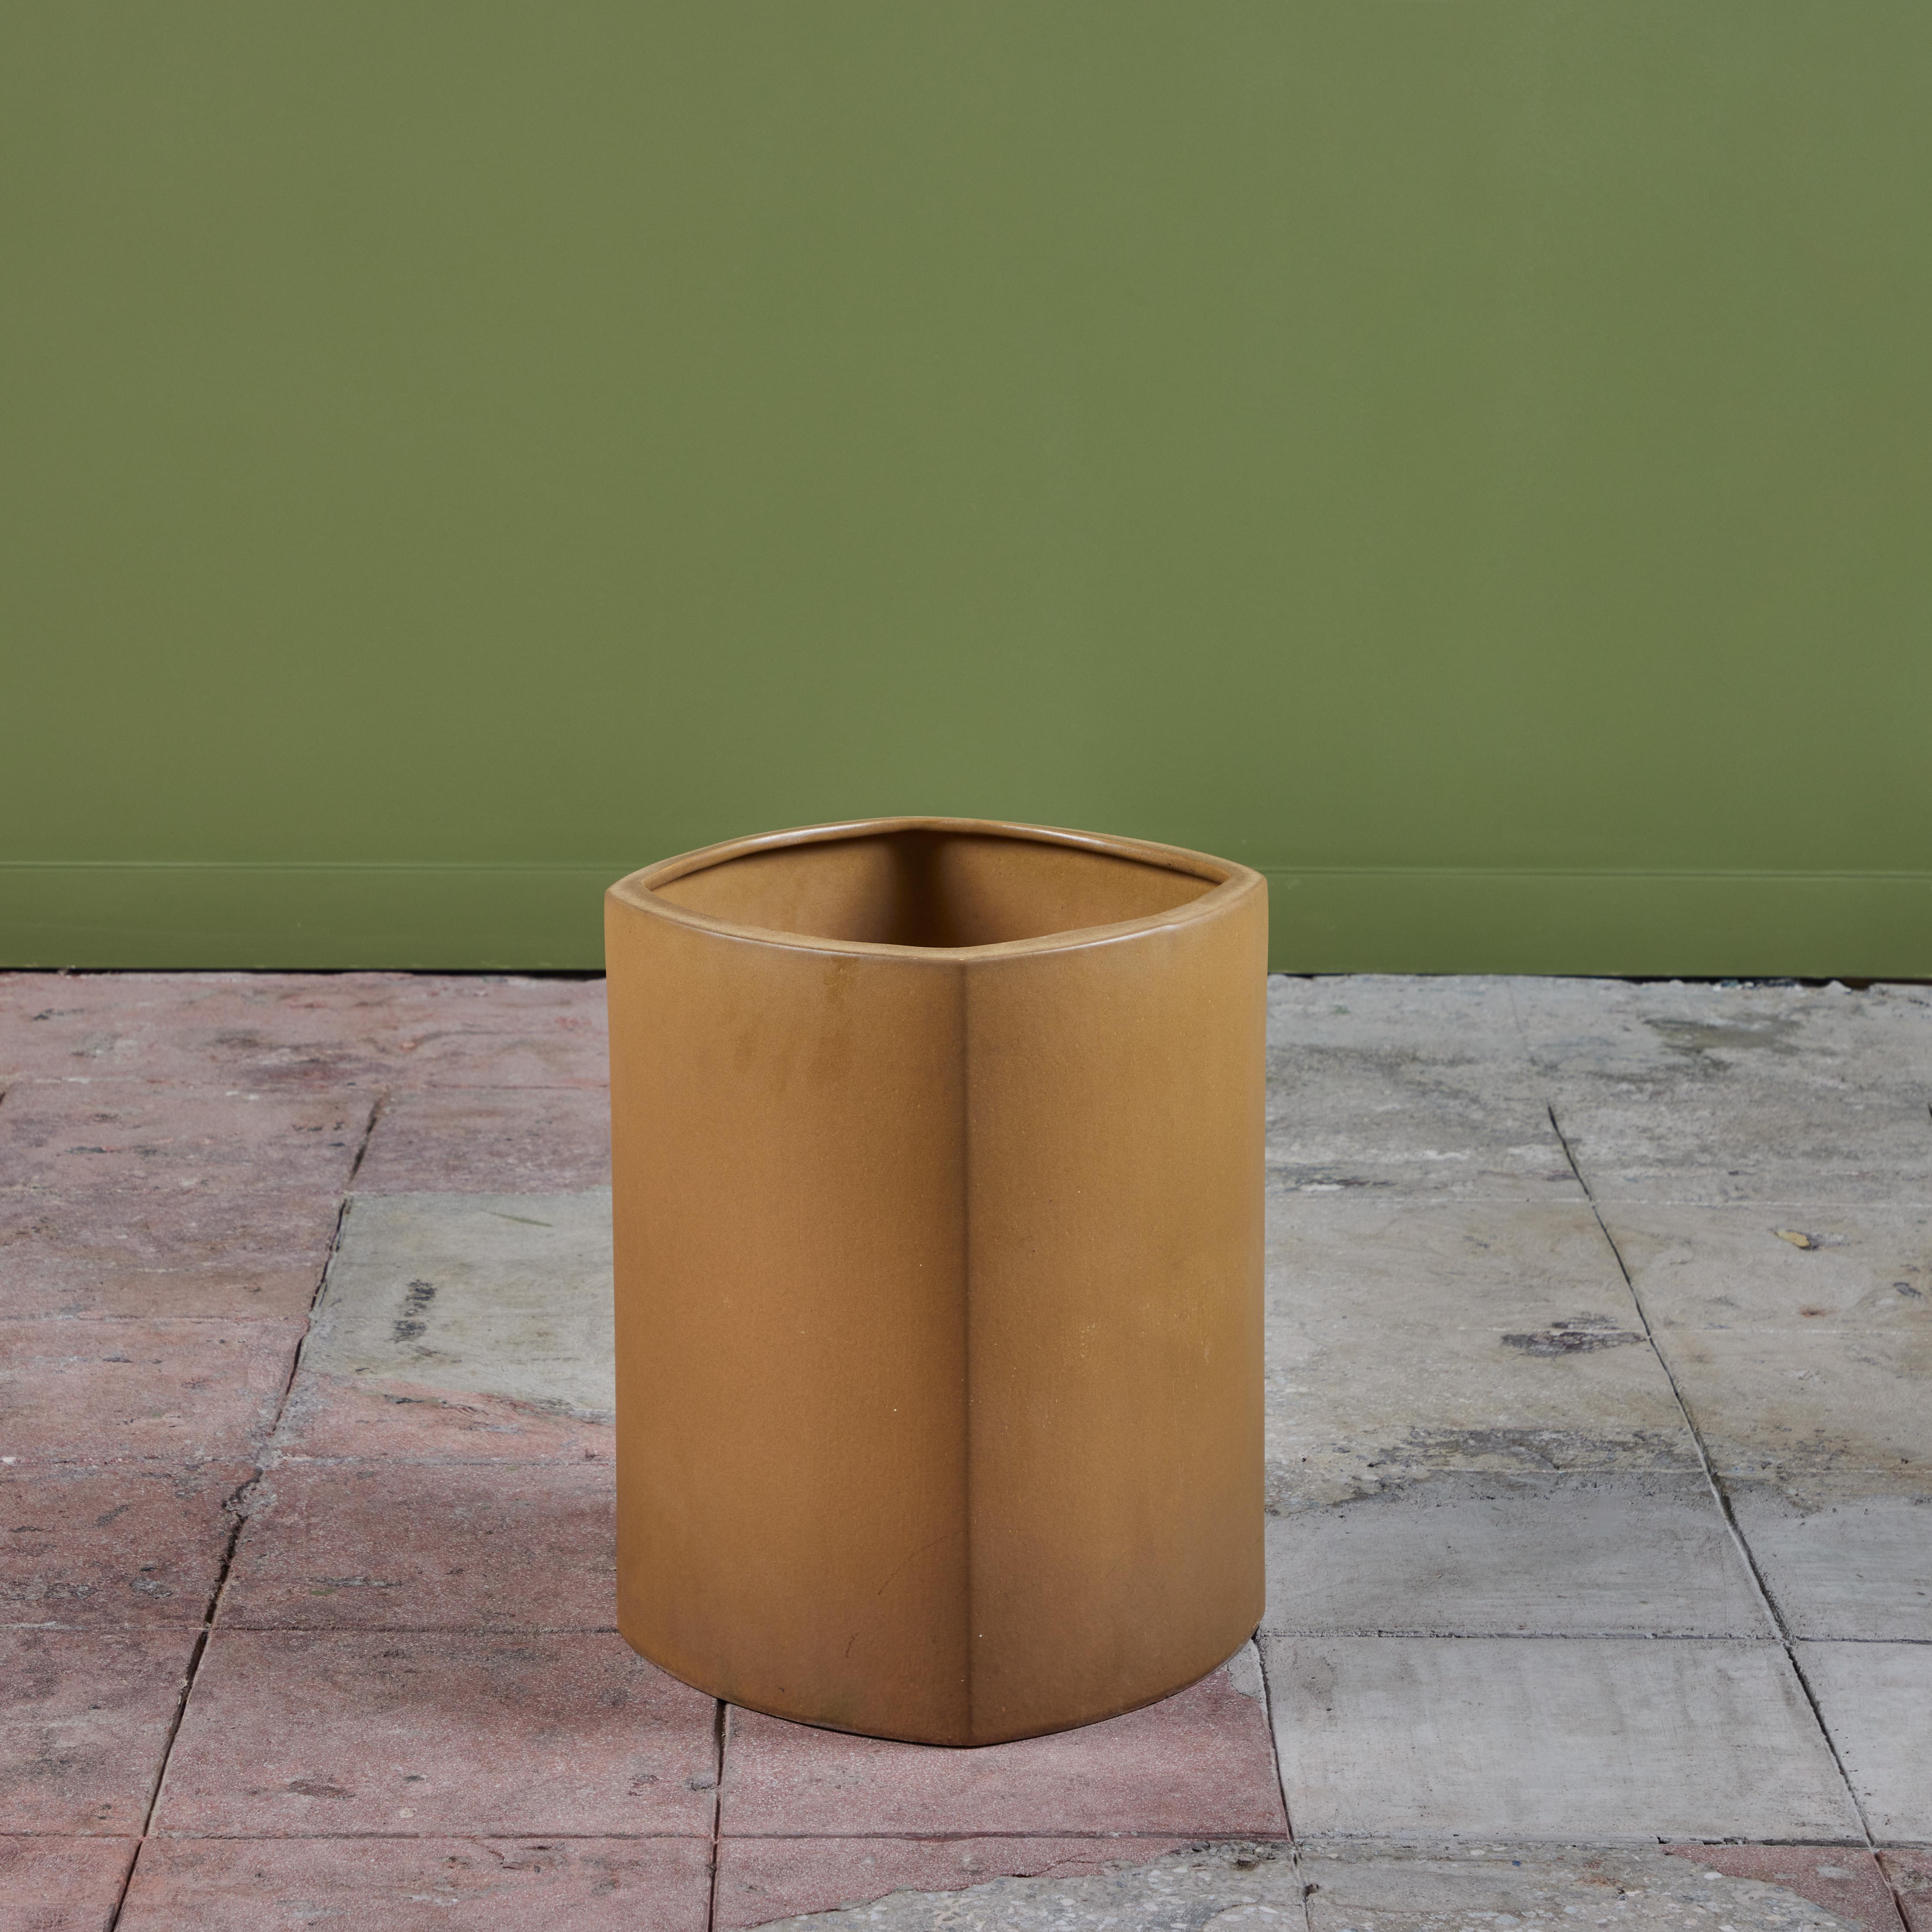 Glazed planter in gold by ceramics artist Marilyn Kay Austin for Architectural Pottery. This example, features a rounded square shape. The golden glaze can be found both inside and out. Could be used as a stylish planter for indoor or outdoor